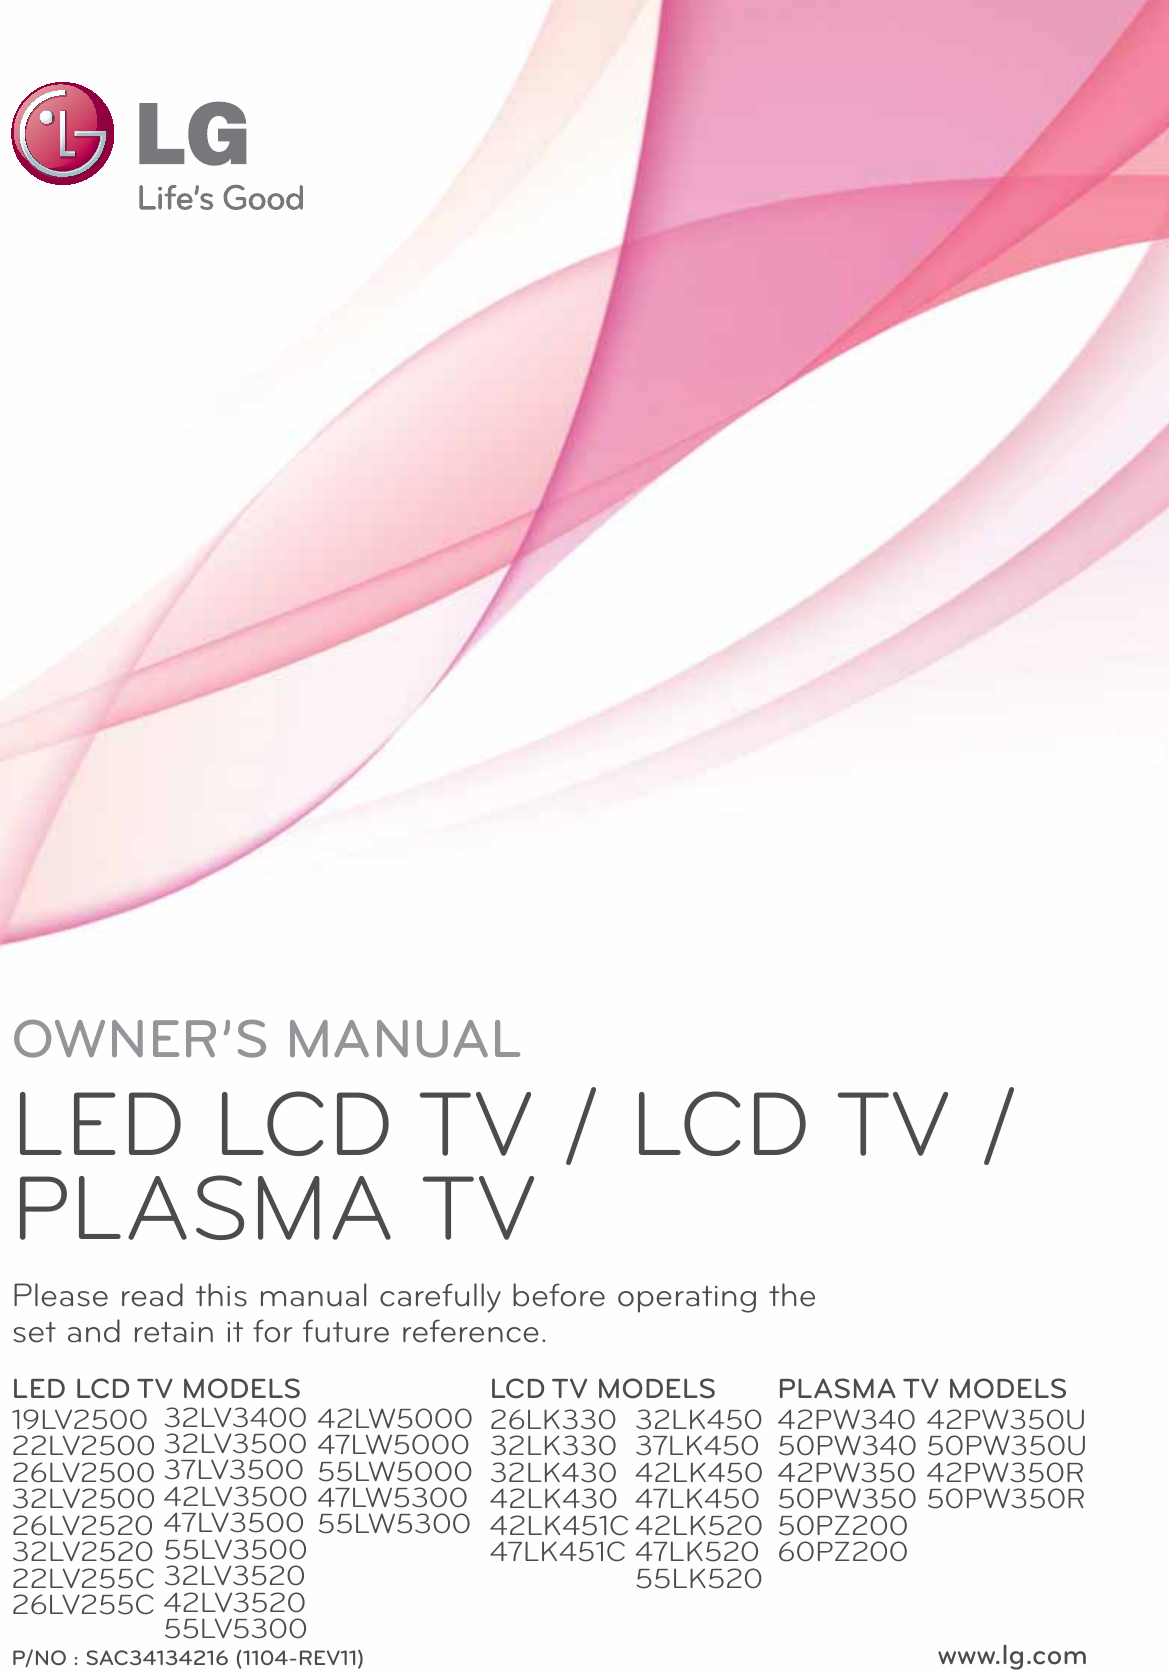 www.lg.comP/NO : SAC34134216 (1104-REV11)OWNER’S MANUALLED LCD TV / LCD TV / PLASMA TVPlease read this manual carefully before operating the set and retain it for future reference.LED LCD TV MODELS19LV250022LV250026LV250032LV250026LV252032LV252022LV255C26LV255CLCD TV MODELS26LK33032LK33032LK43042LK43042LK451C47LK451CPLASMA TV MODELS42PW34050PW34042PW35050PW35050PZ20060PZ20032LV340032LV350037LV350042LV350047LV350055LV350032LV352042LV352055LV530032LK45037LK45042LK45047LK45042LK52047LK52055LK52042PW350U50PW350U42PW350R50PW350R42LW500047LW500055LW500047LW530055LW5300